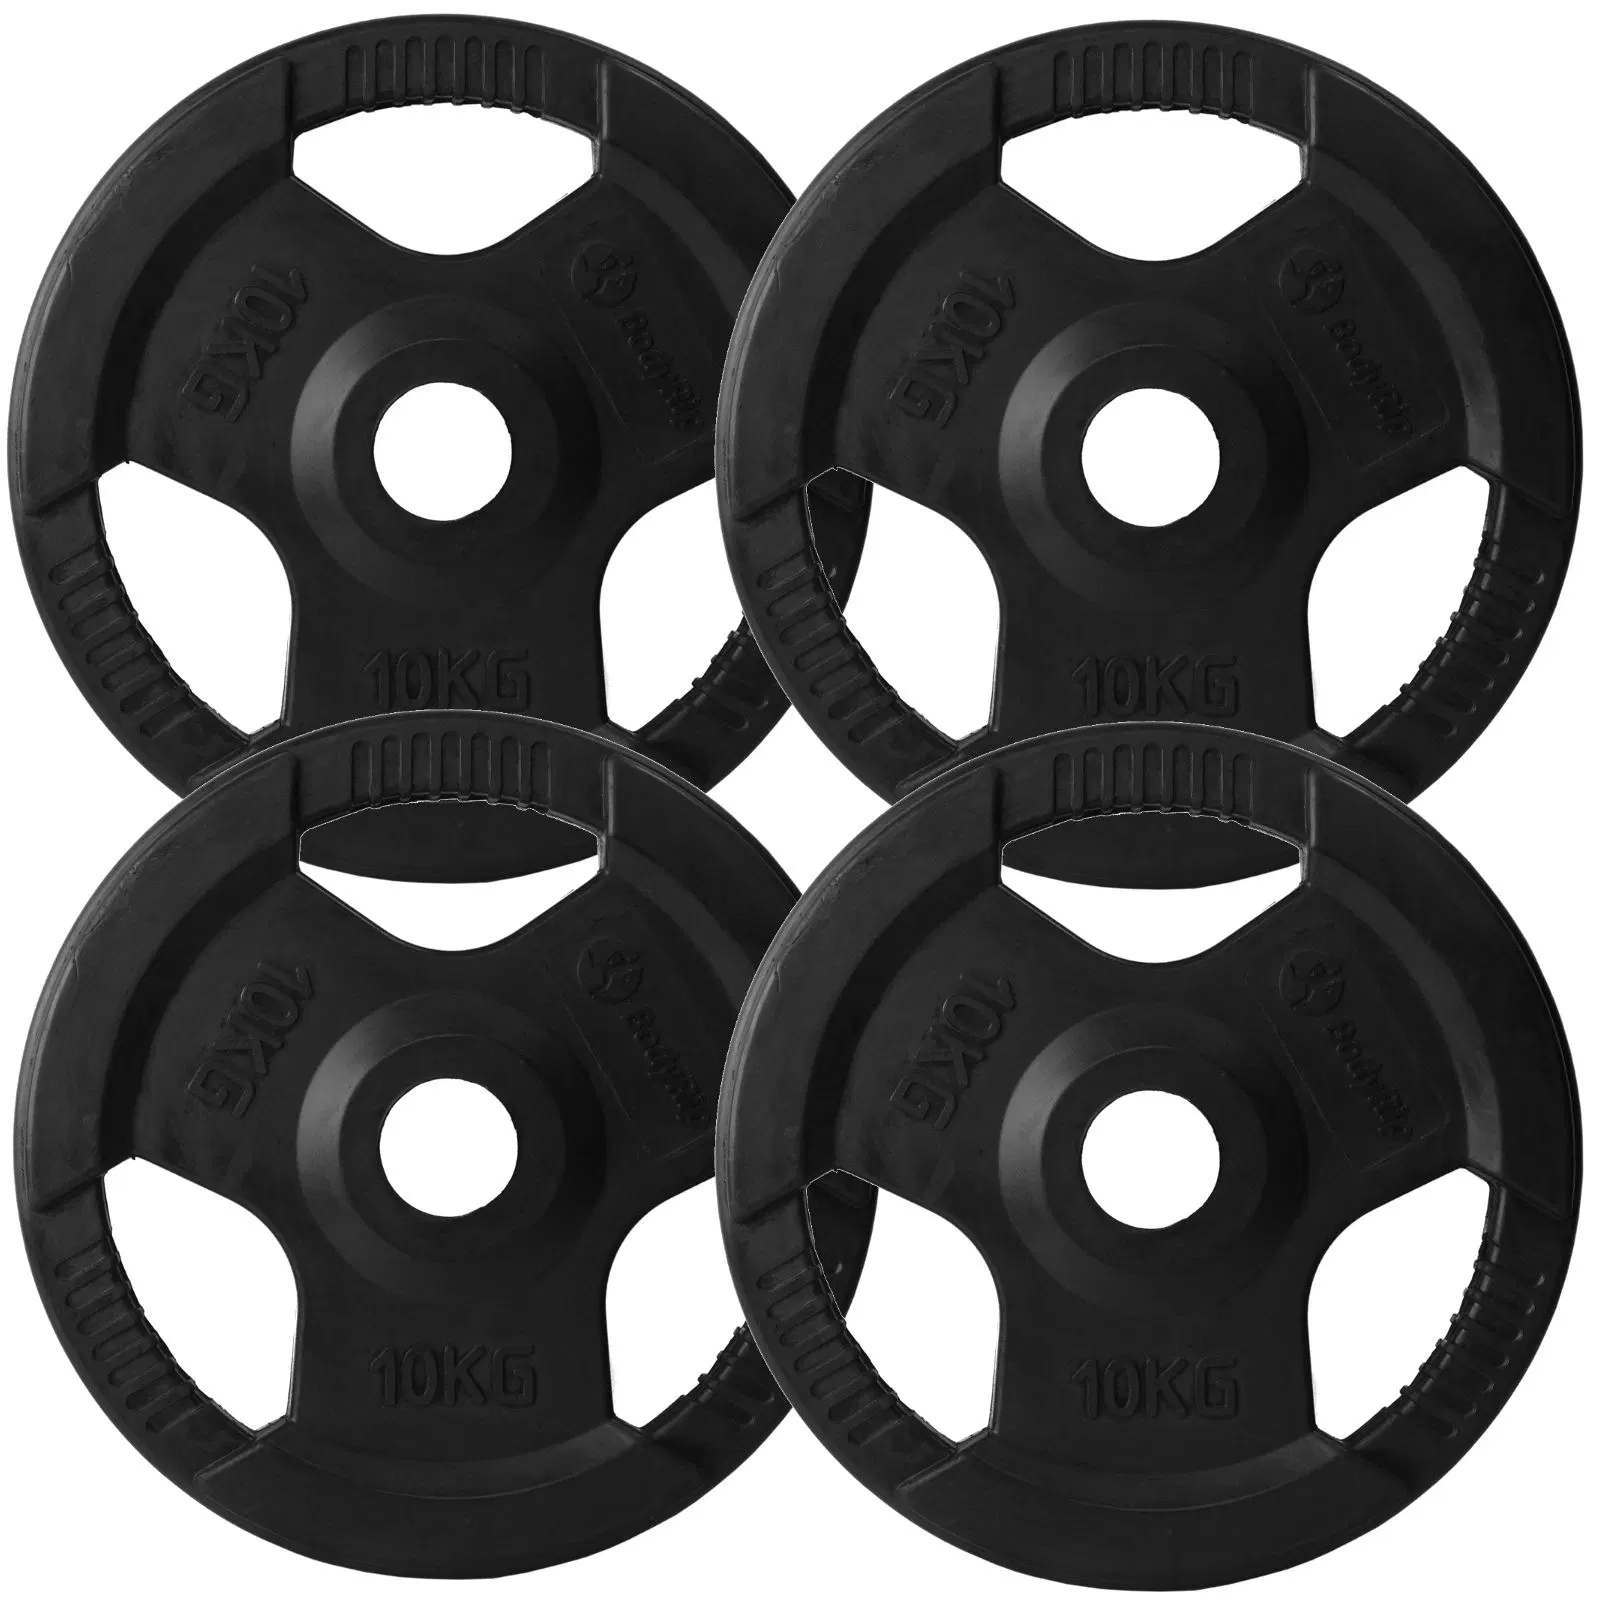 Free Weight Fitness Equipment Black Rubber Coated Plate Gym Accessories